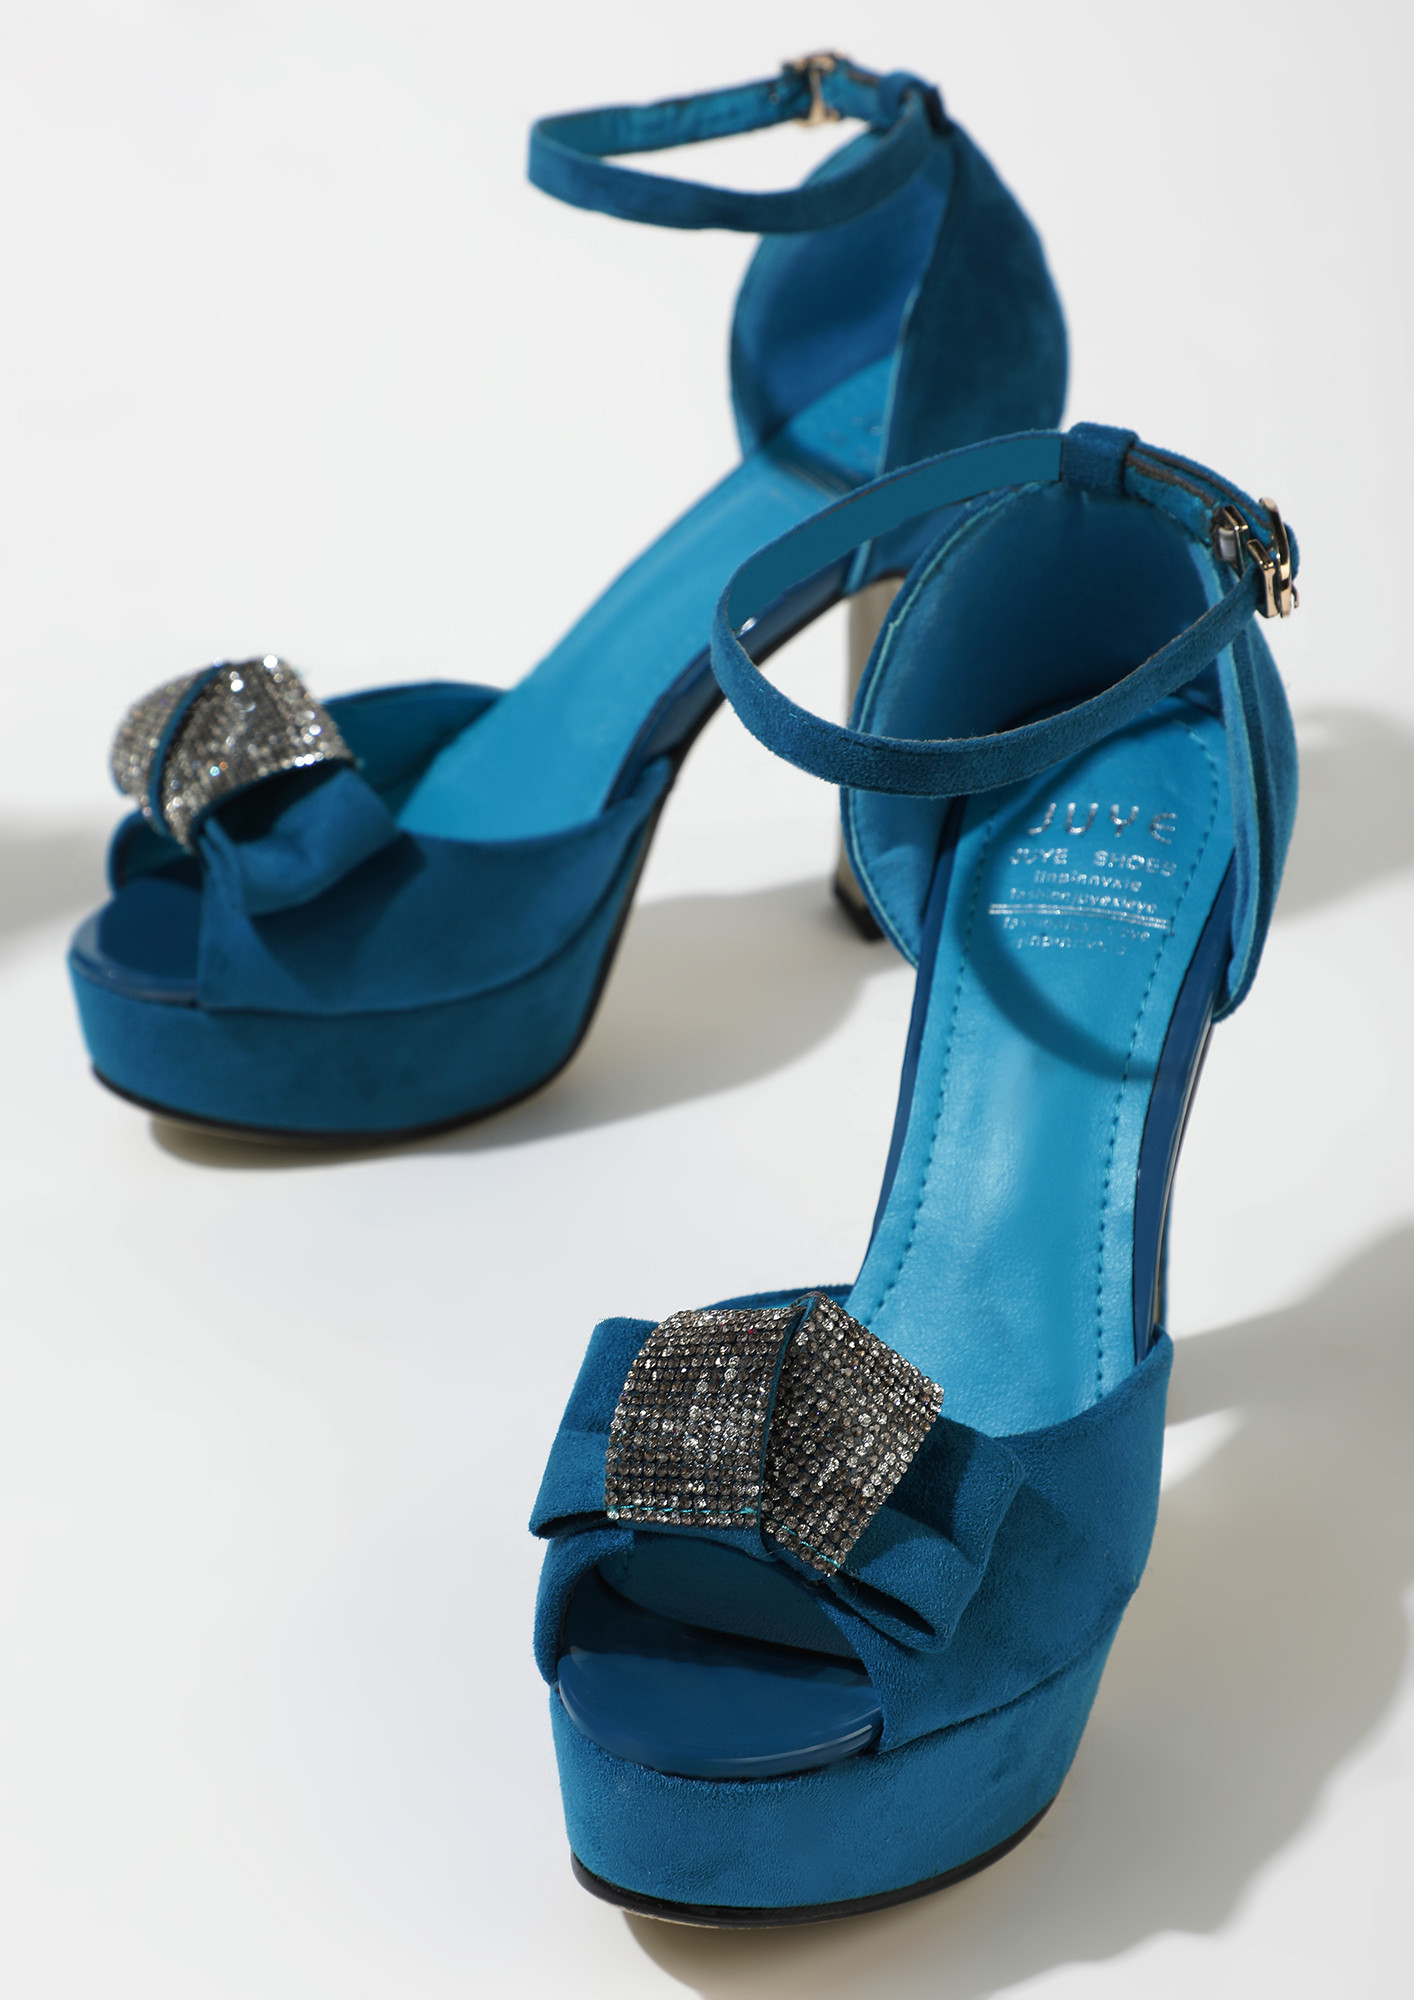 ON THE RISE BLUE PEEP TOES